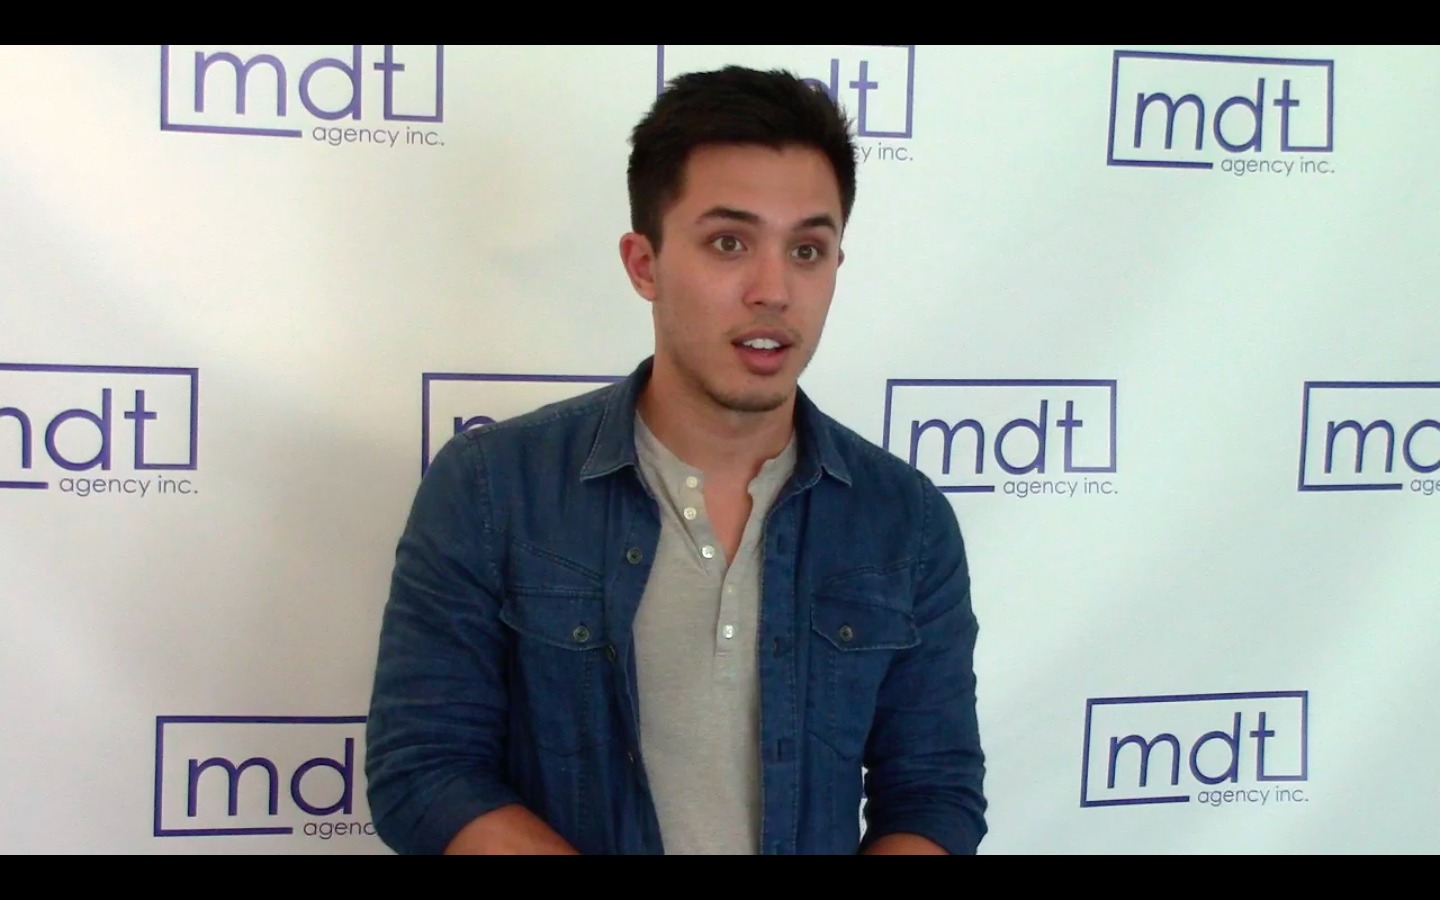 Lee Doud at the MDT Agency offices in San Francisco